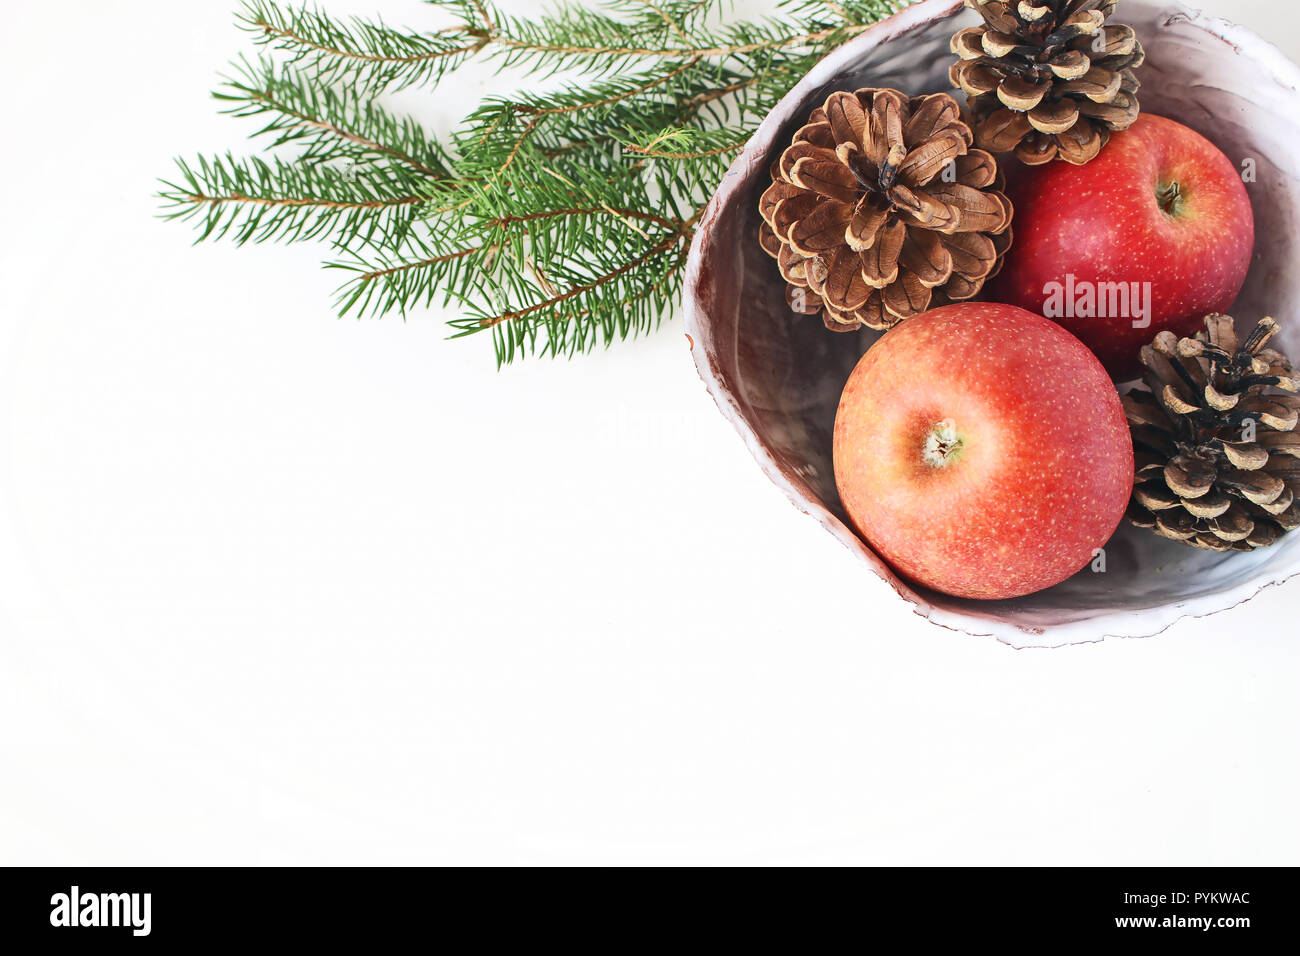 Closeup of red apple fruit and pine cones in ceramic bowl and spruce tree branches on white table background. Christmas holiday styled stock photo. Winter food composition. Flat lay, top view. Stock Photo